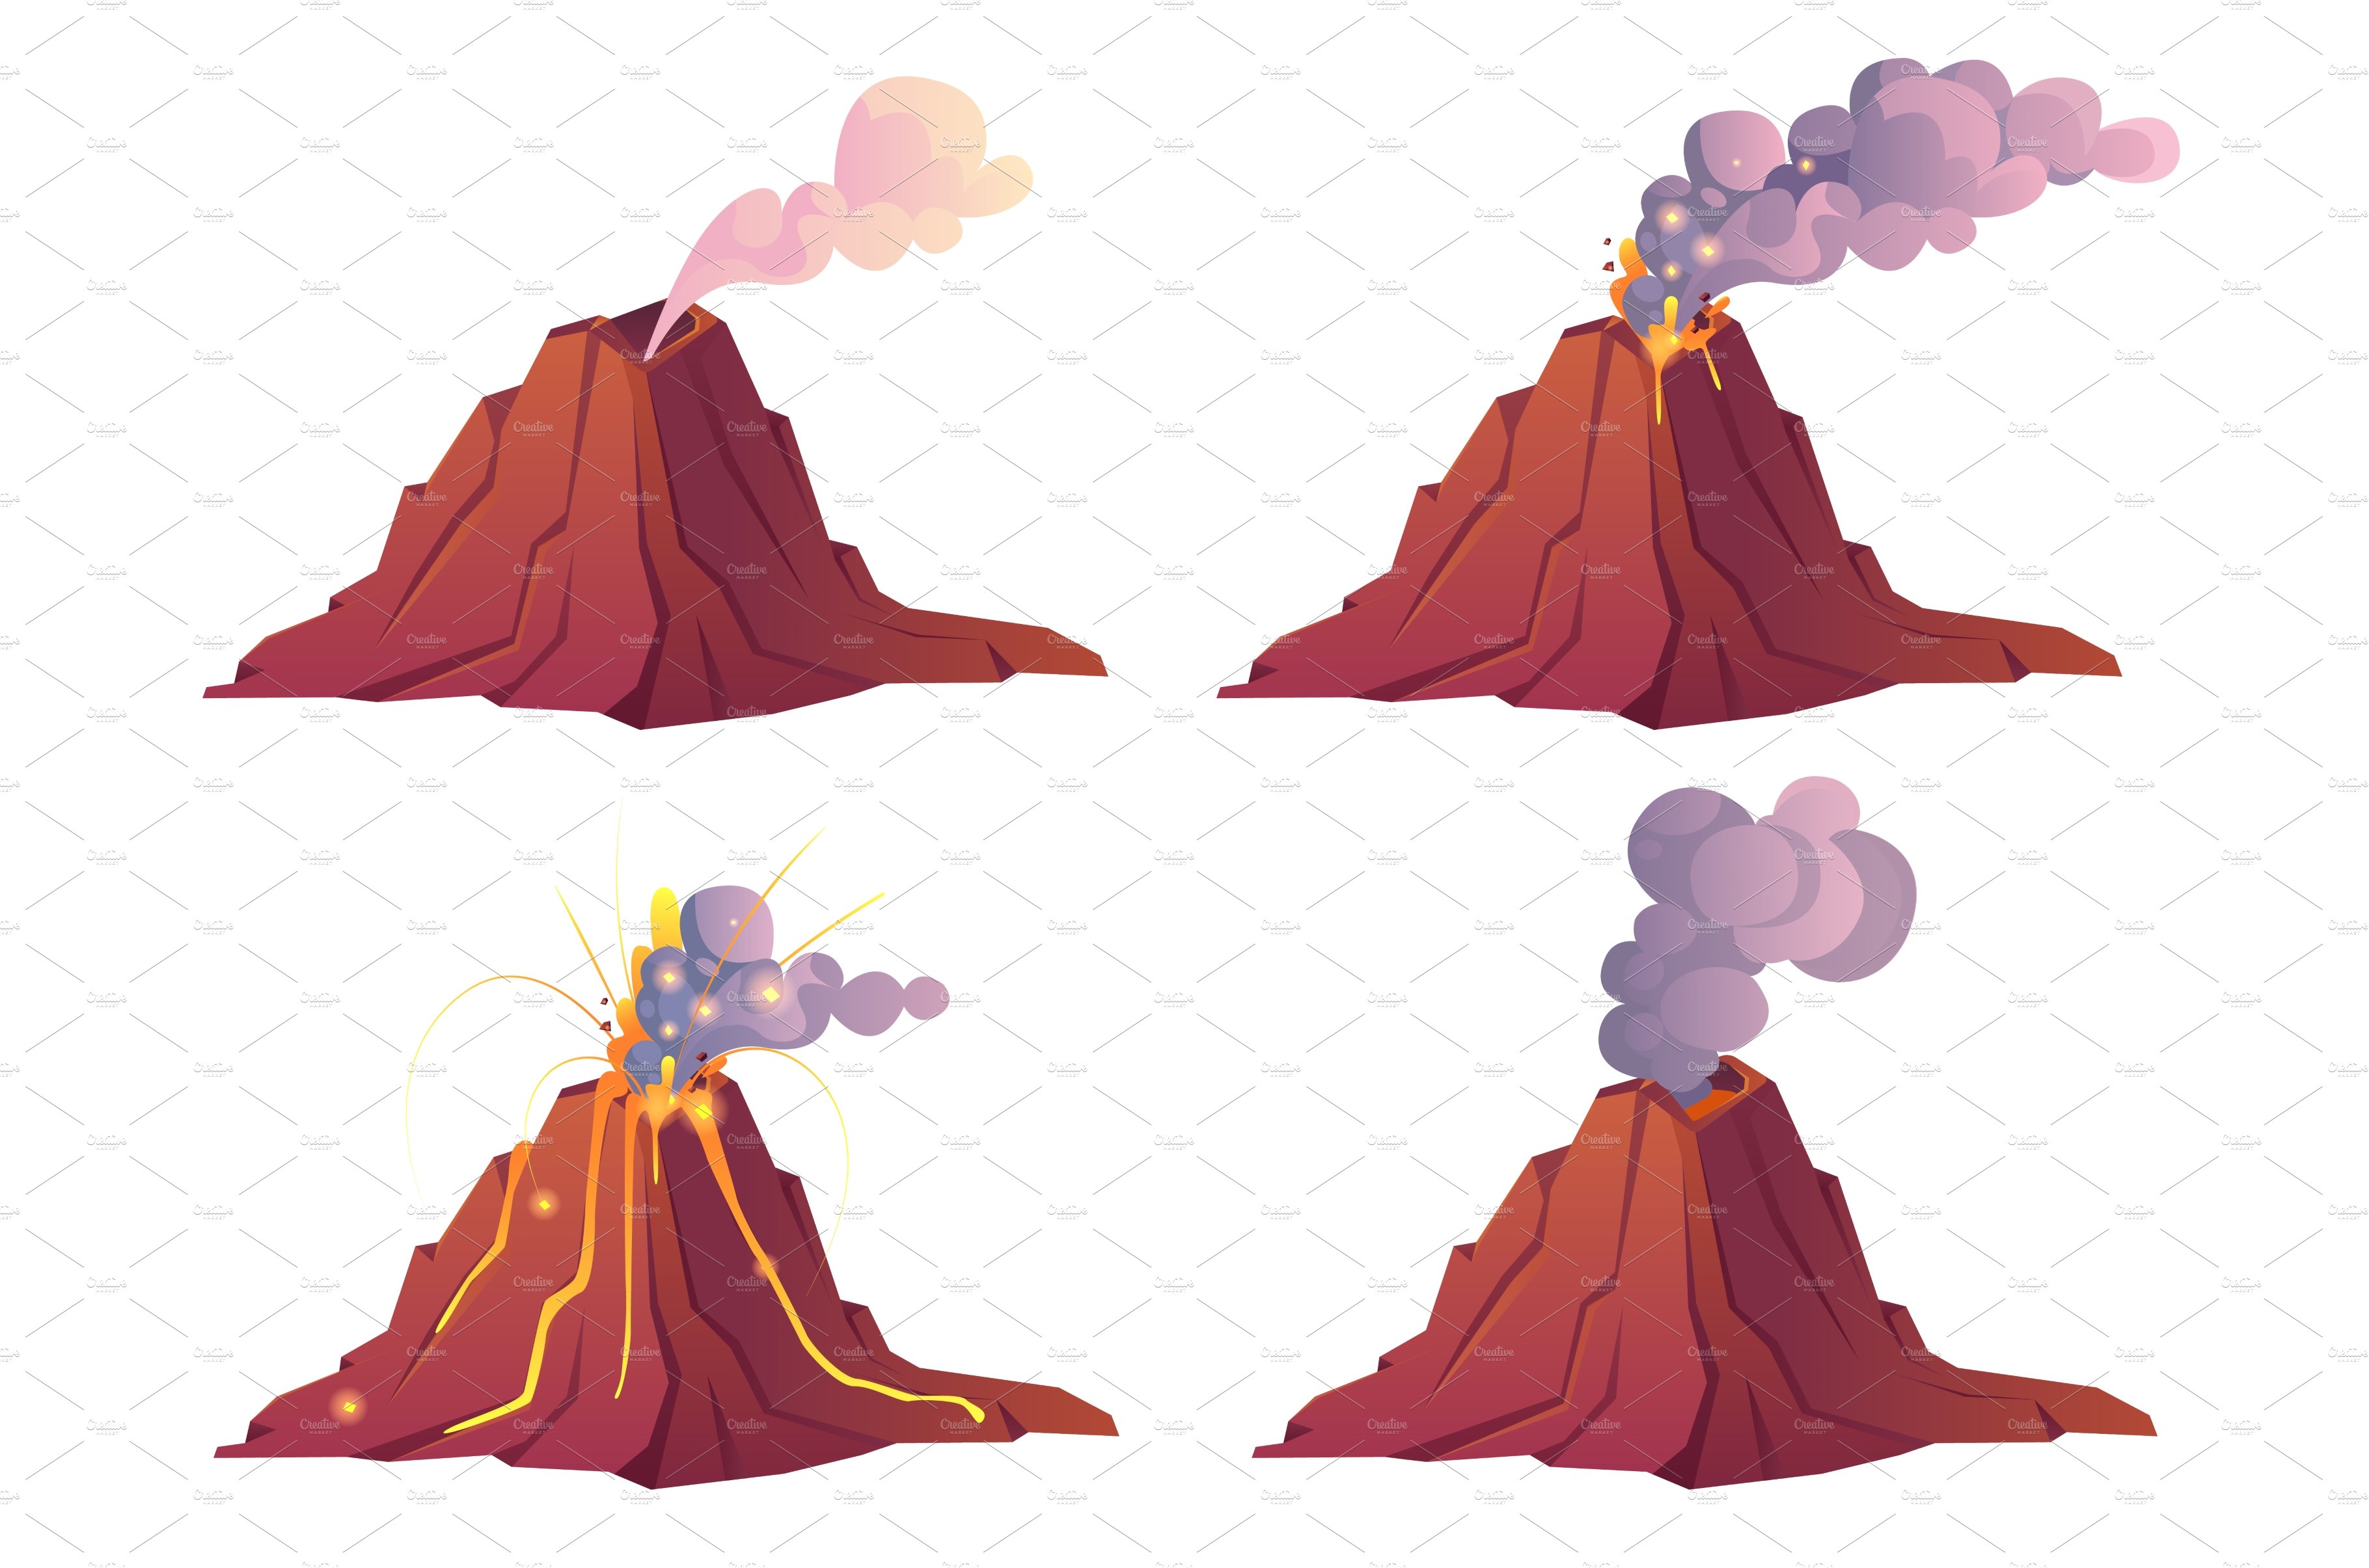 Volcanic eruption stages with lava cover image.